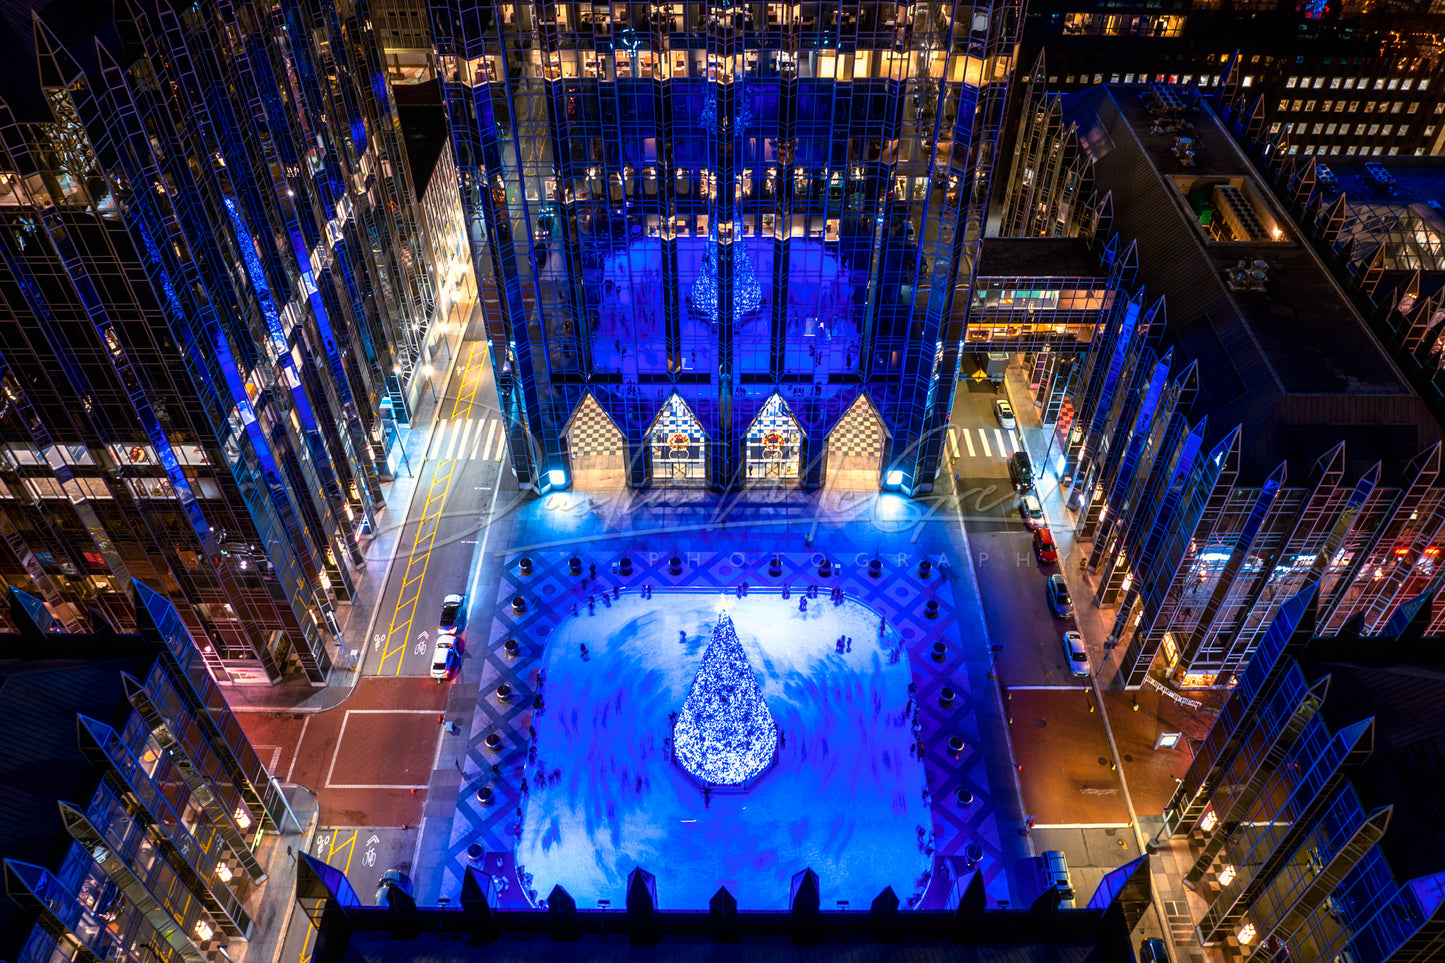 The PPG Place Skating Rink Lit Up in Blue